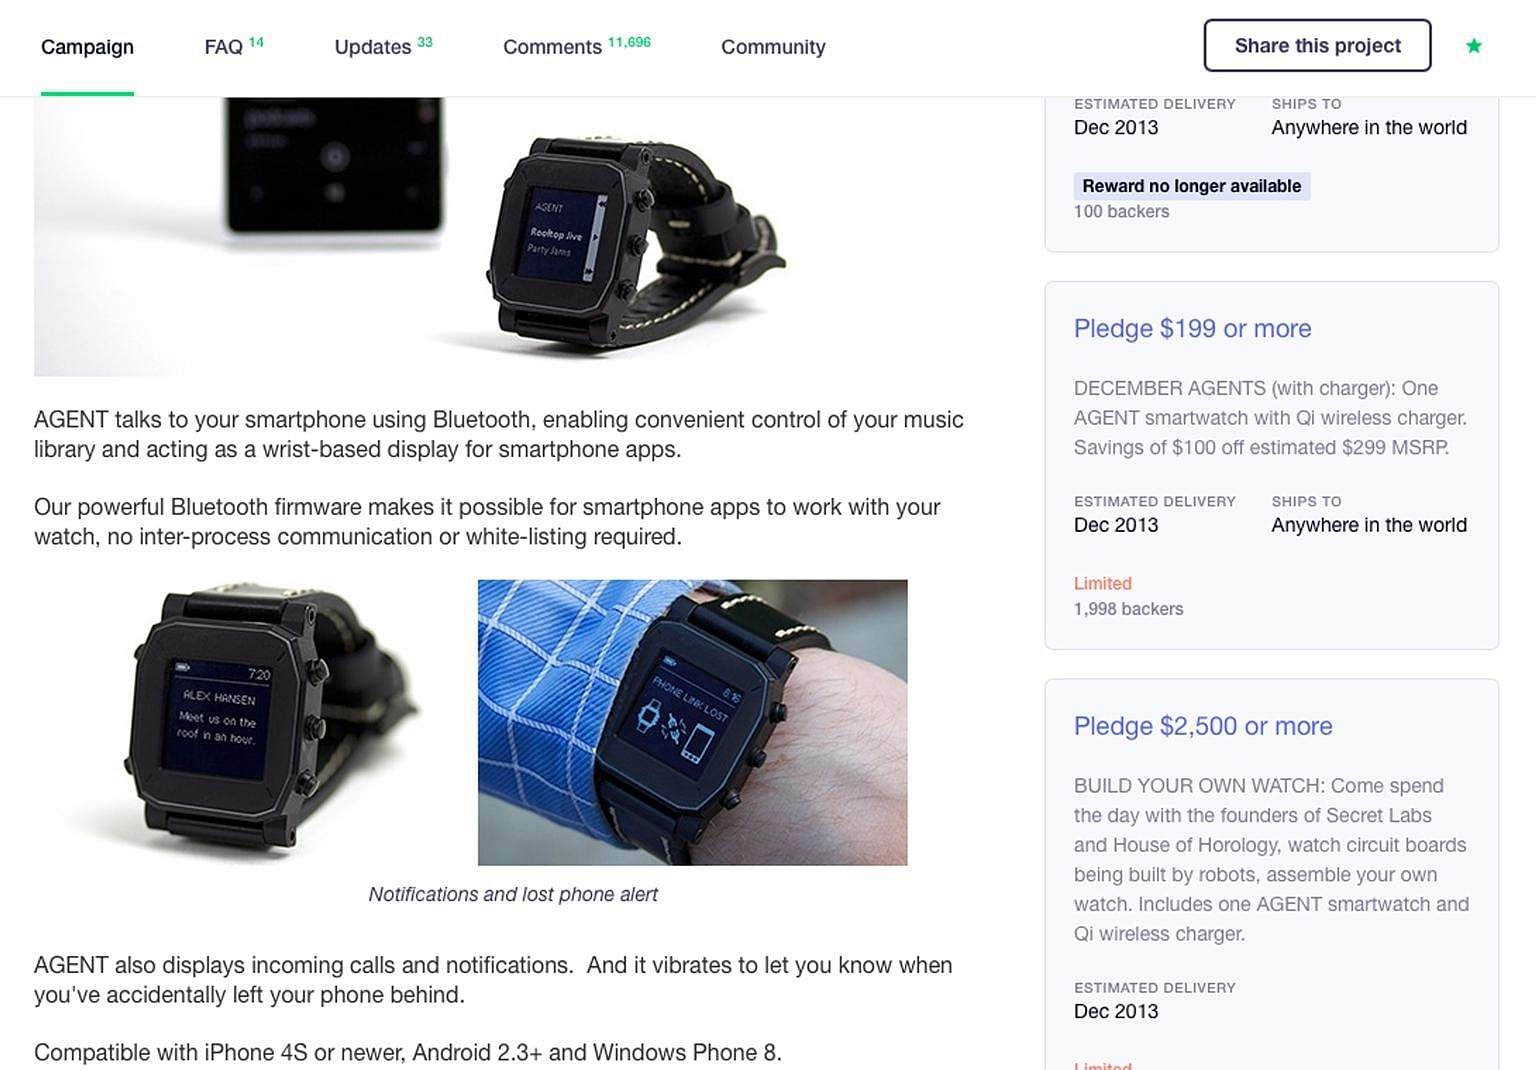 The Kickstarter campaign site for the Agent smartwatch. Originally slated to be launched in early 2014, the project has gone cold, with the last update by the developer a year ago.